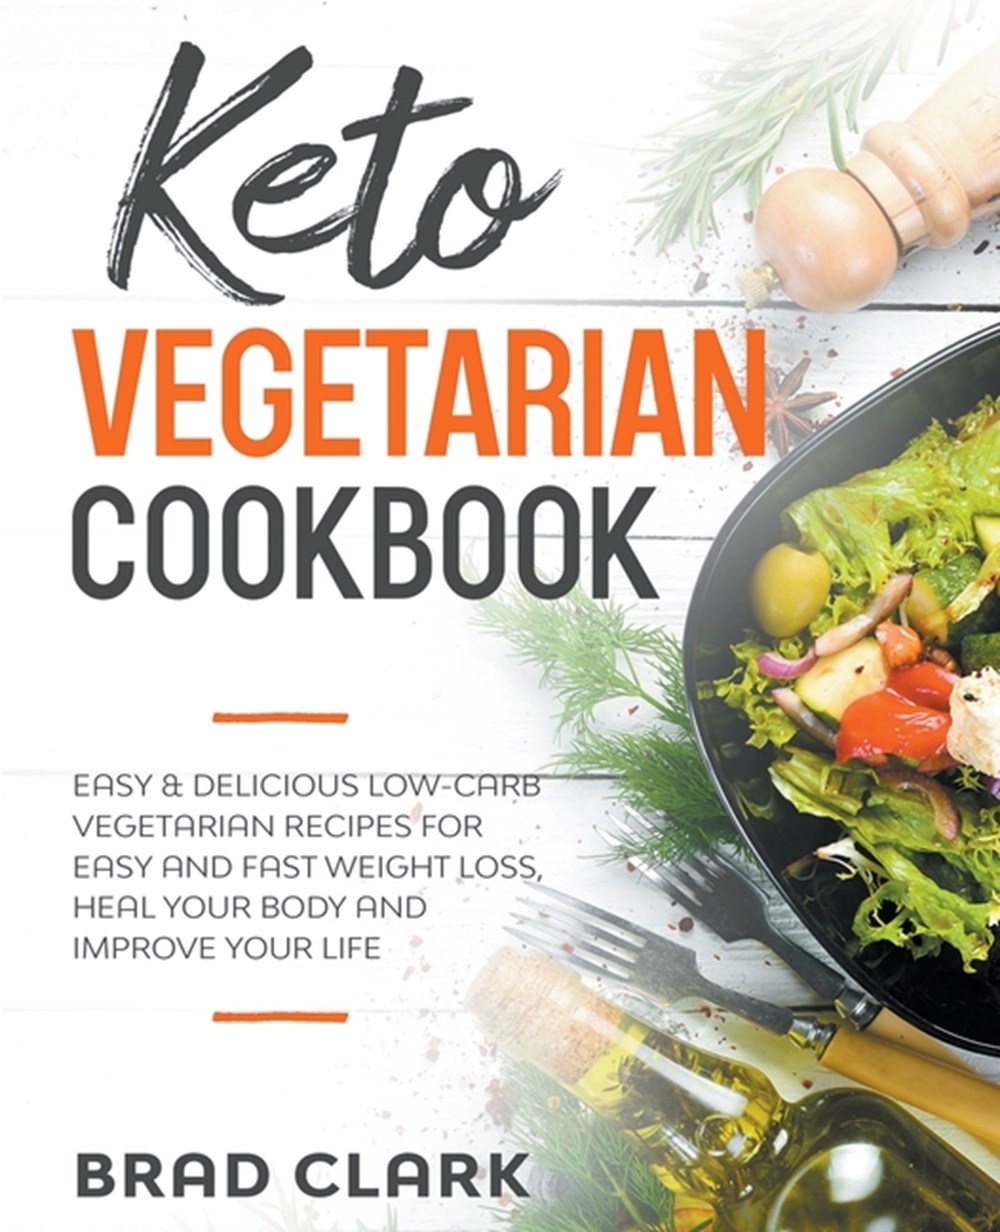 Keto Vegetarian Cookbook: Easy & Delicious Low-Carb Vegetarian Recipes for Easy and Fast Weight Loss